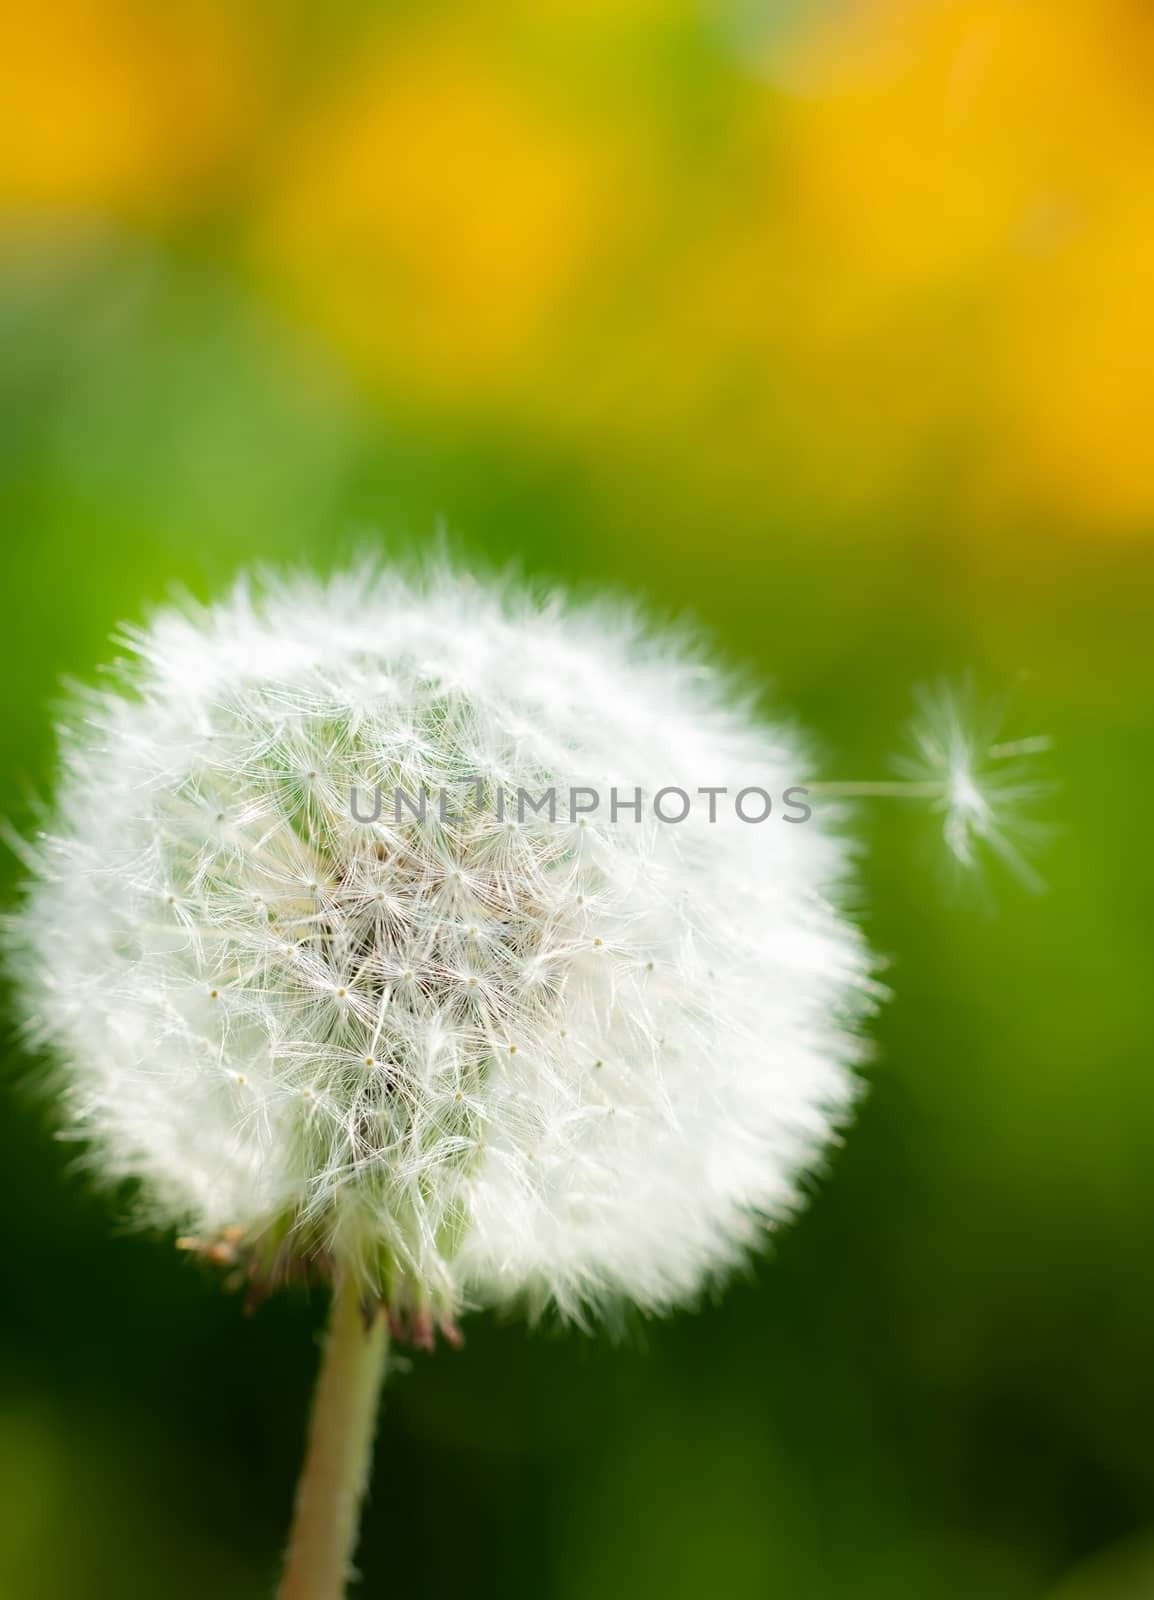 Dandelions close up on a blurred background.